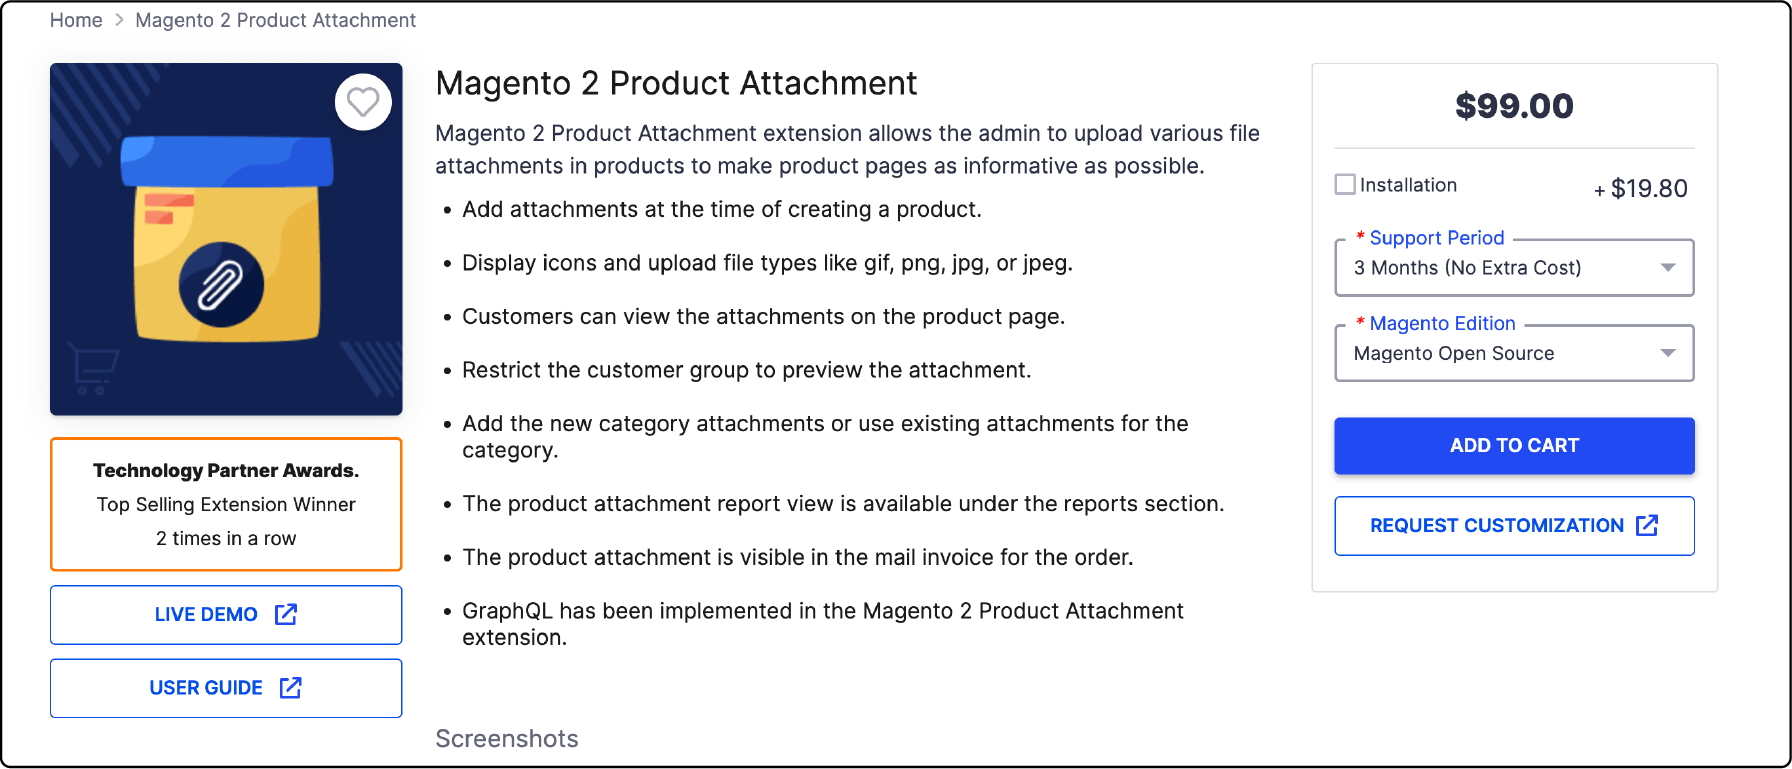 WebKul's Product Attachment for Magento 2 Screenshot